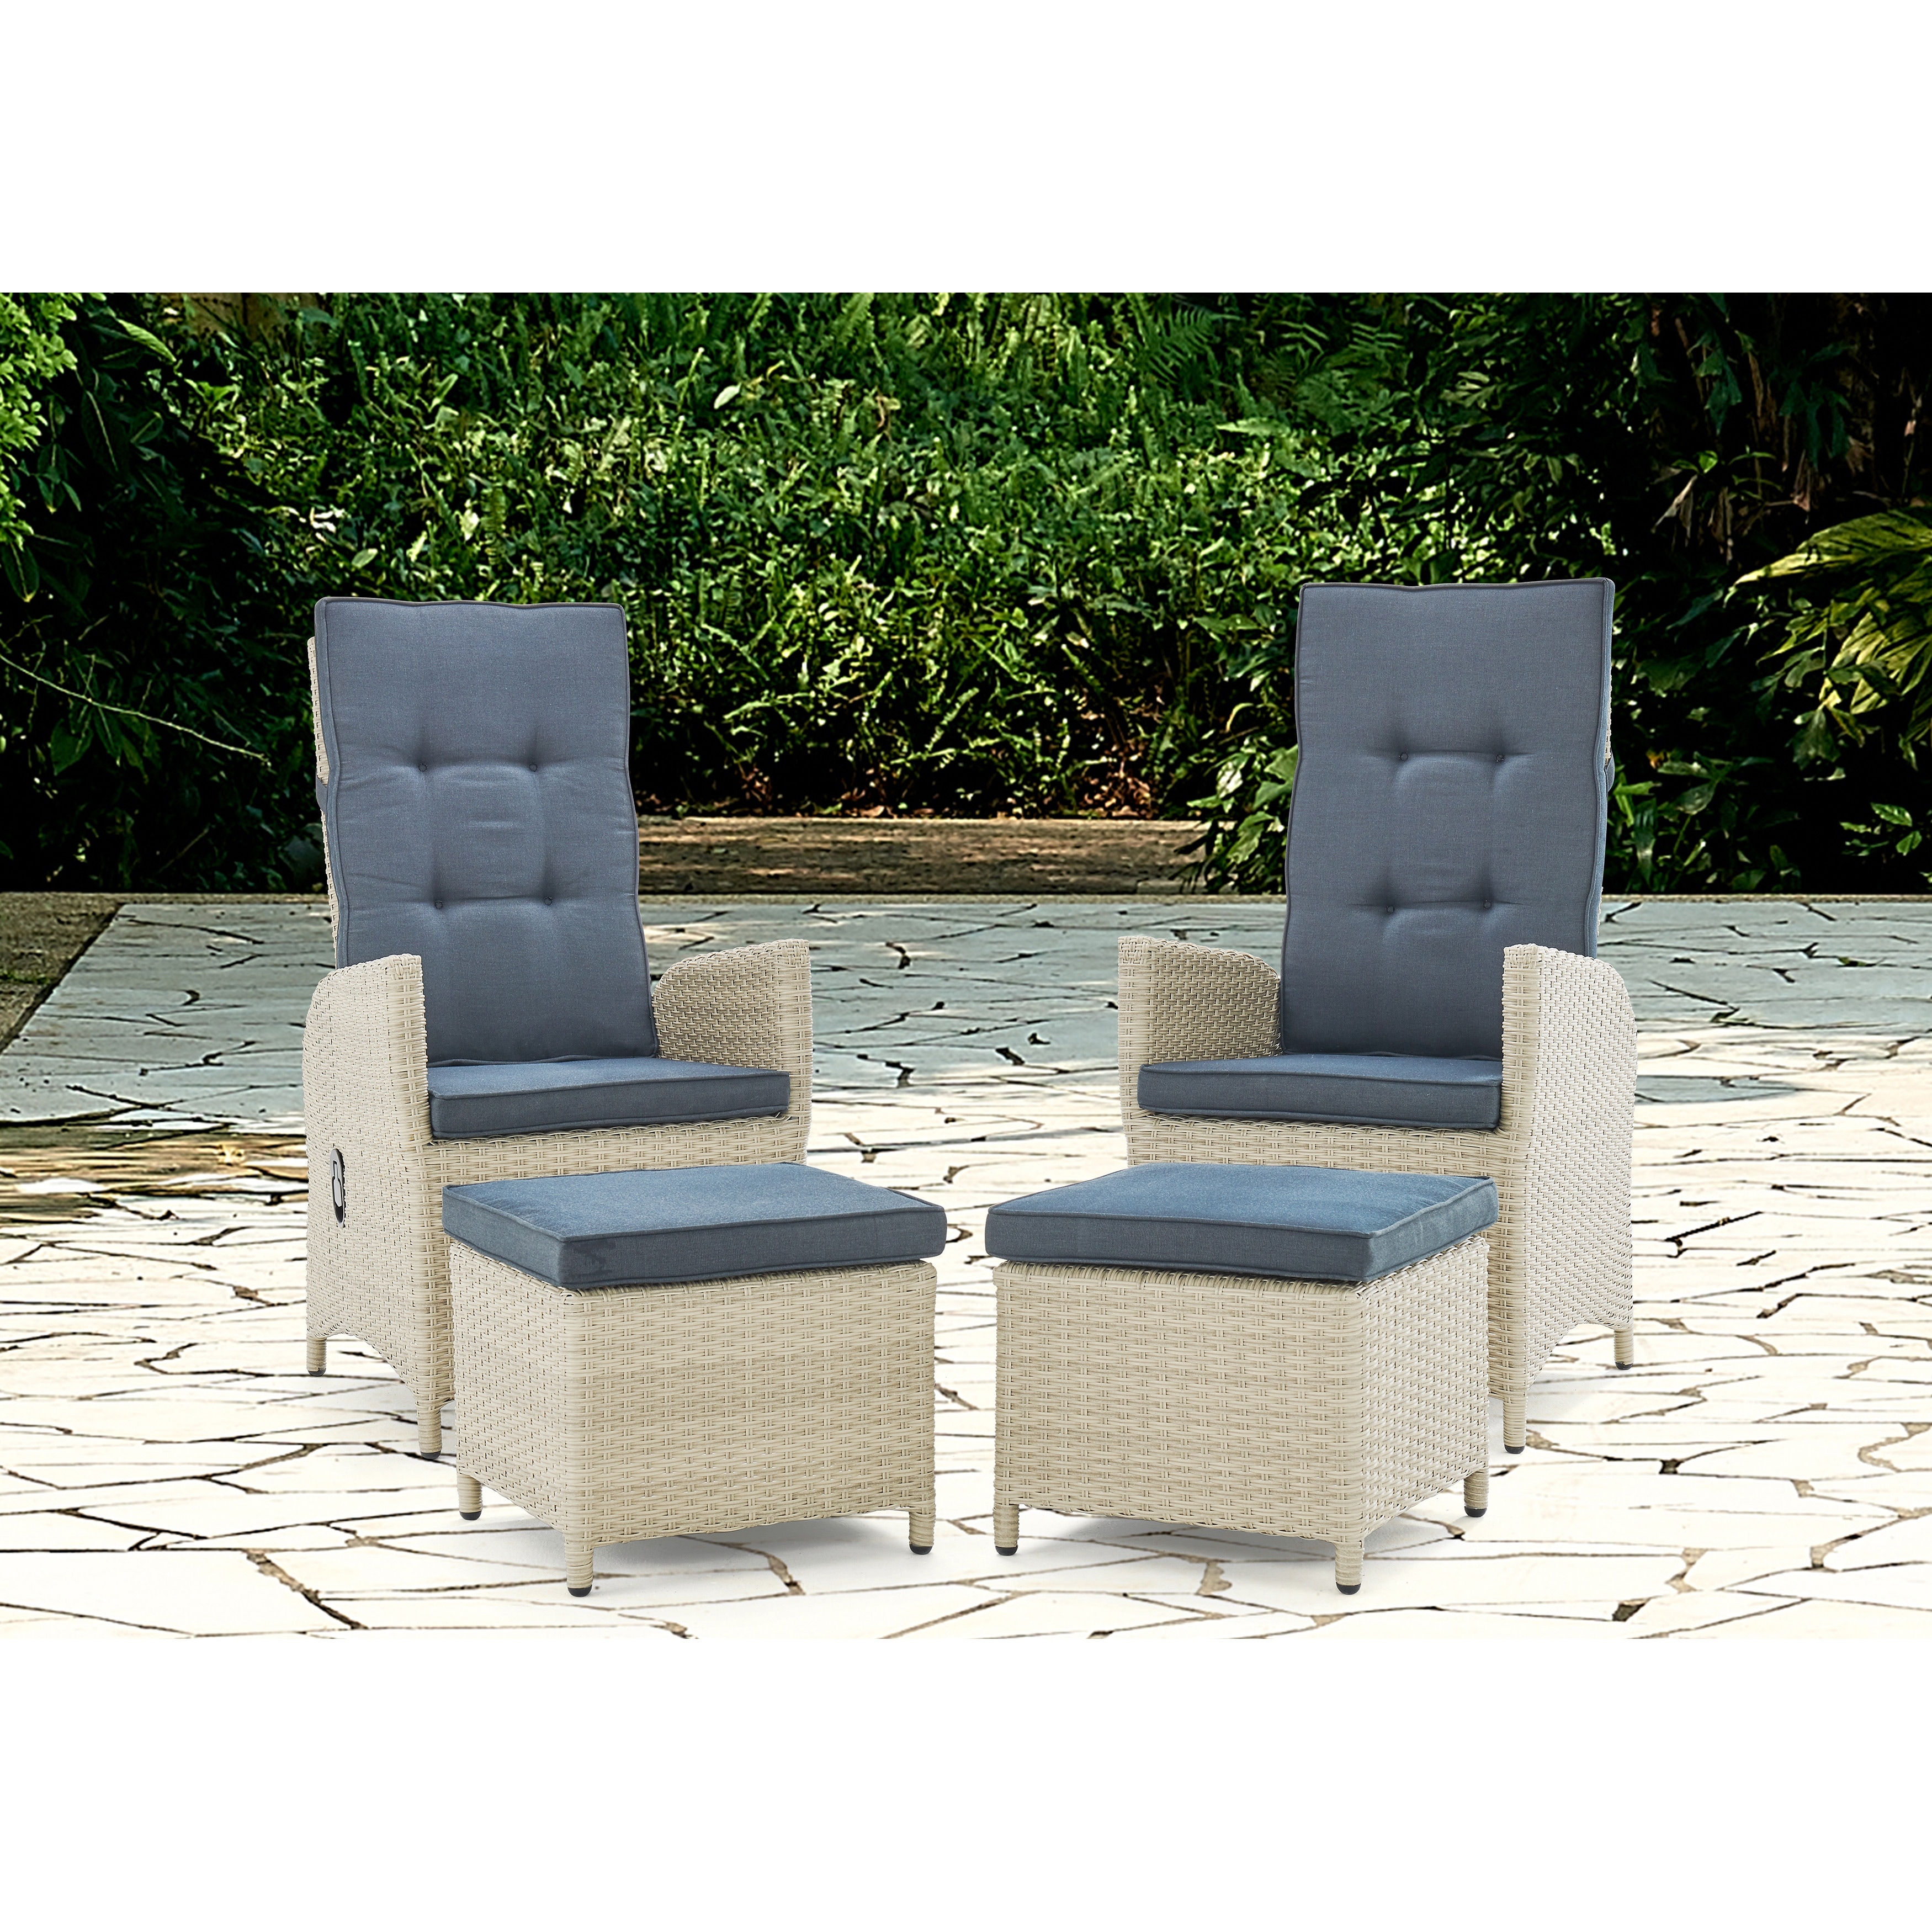 Lamitan Outdoor Wicker Recliners With Ottomans (set Of 2) By Havenside Home